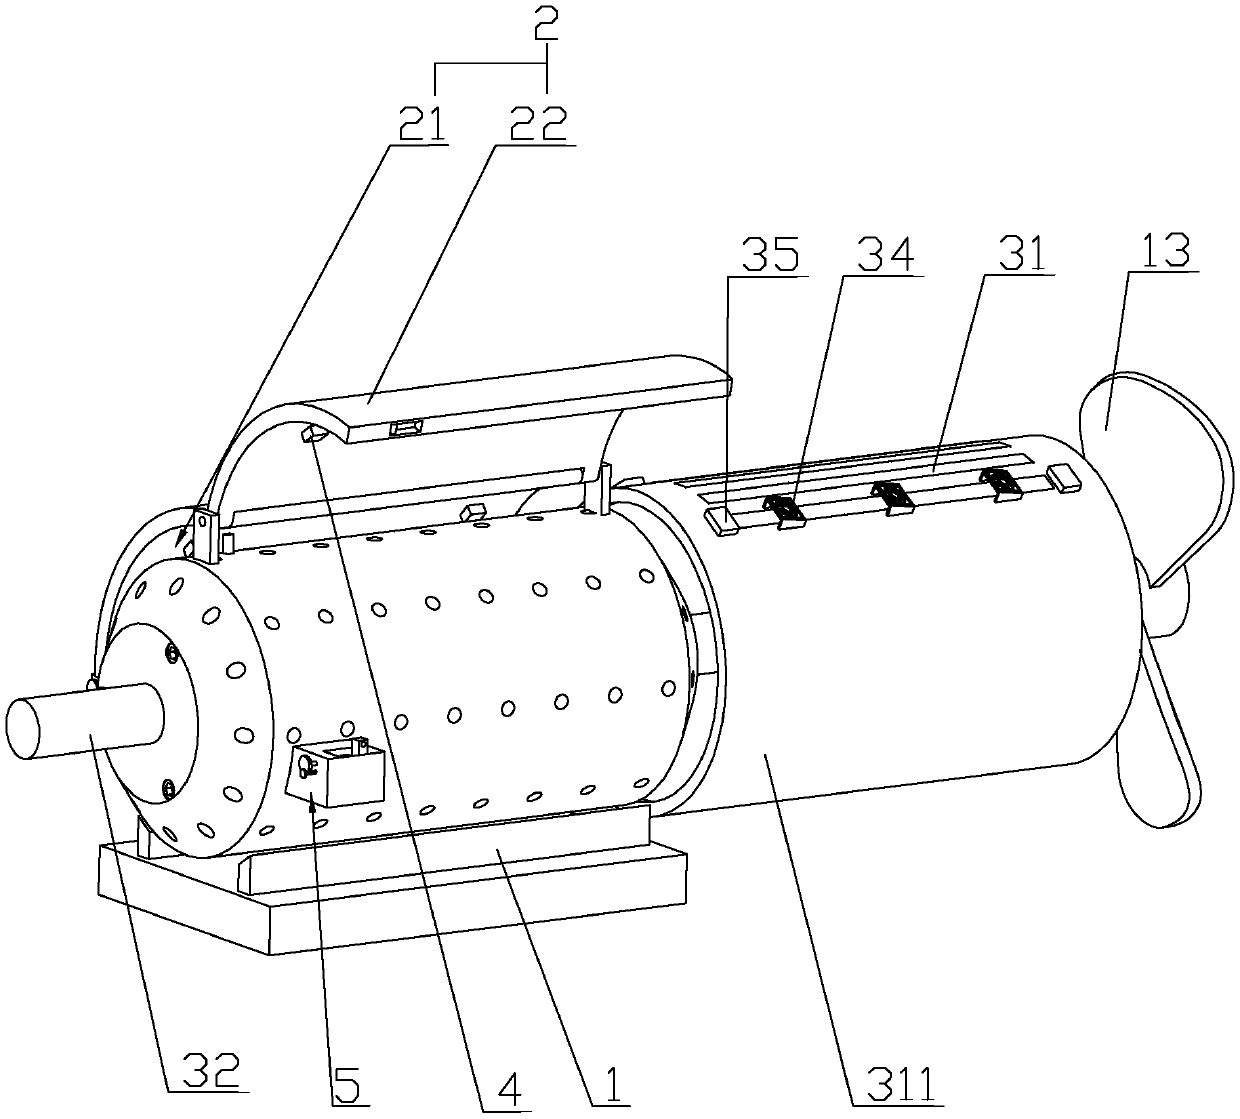 Three-phase asynchronous motor for explosion-proof fan